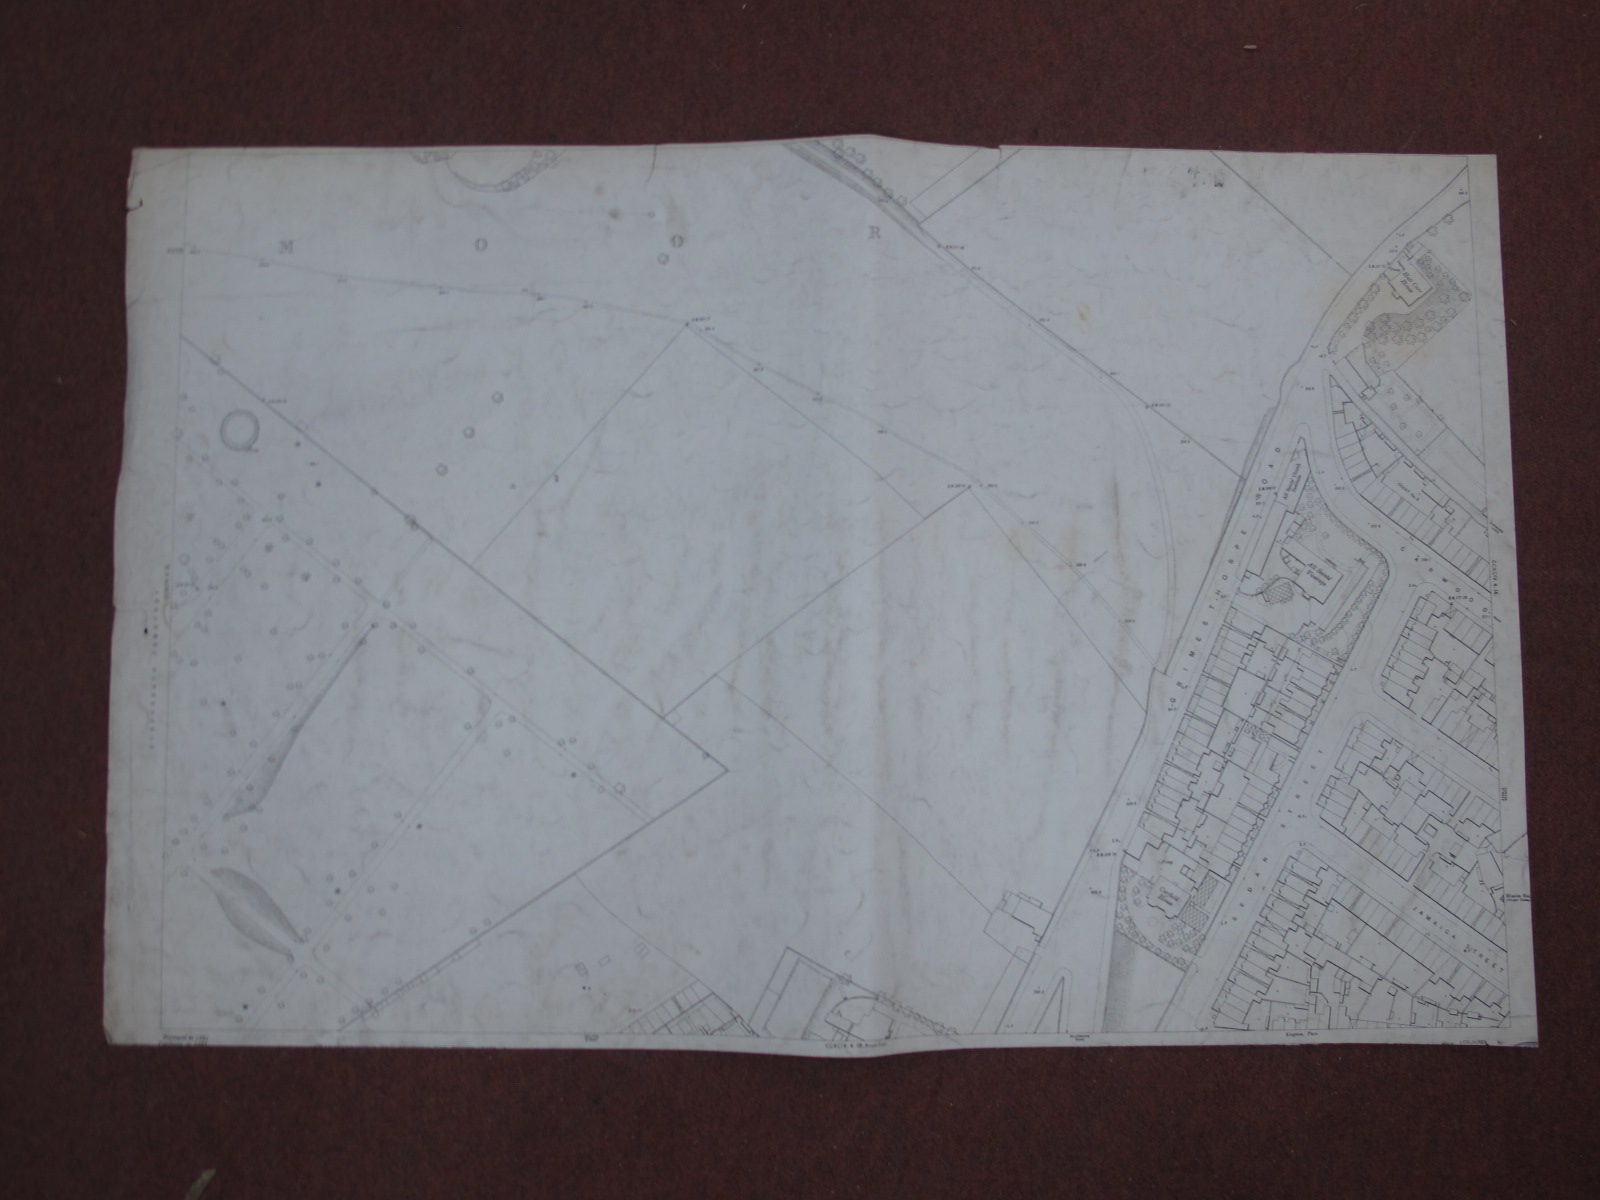 Sheffield Maps, Brightside, Burngreave - some dates noted, 1893, 1890, various scales, dirty and